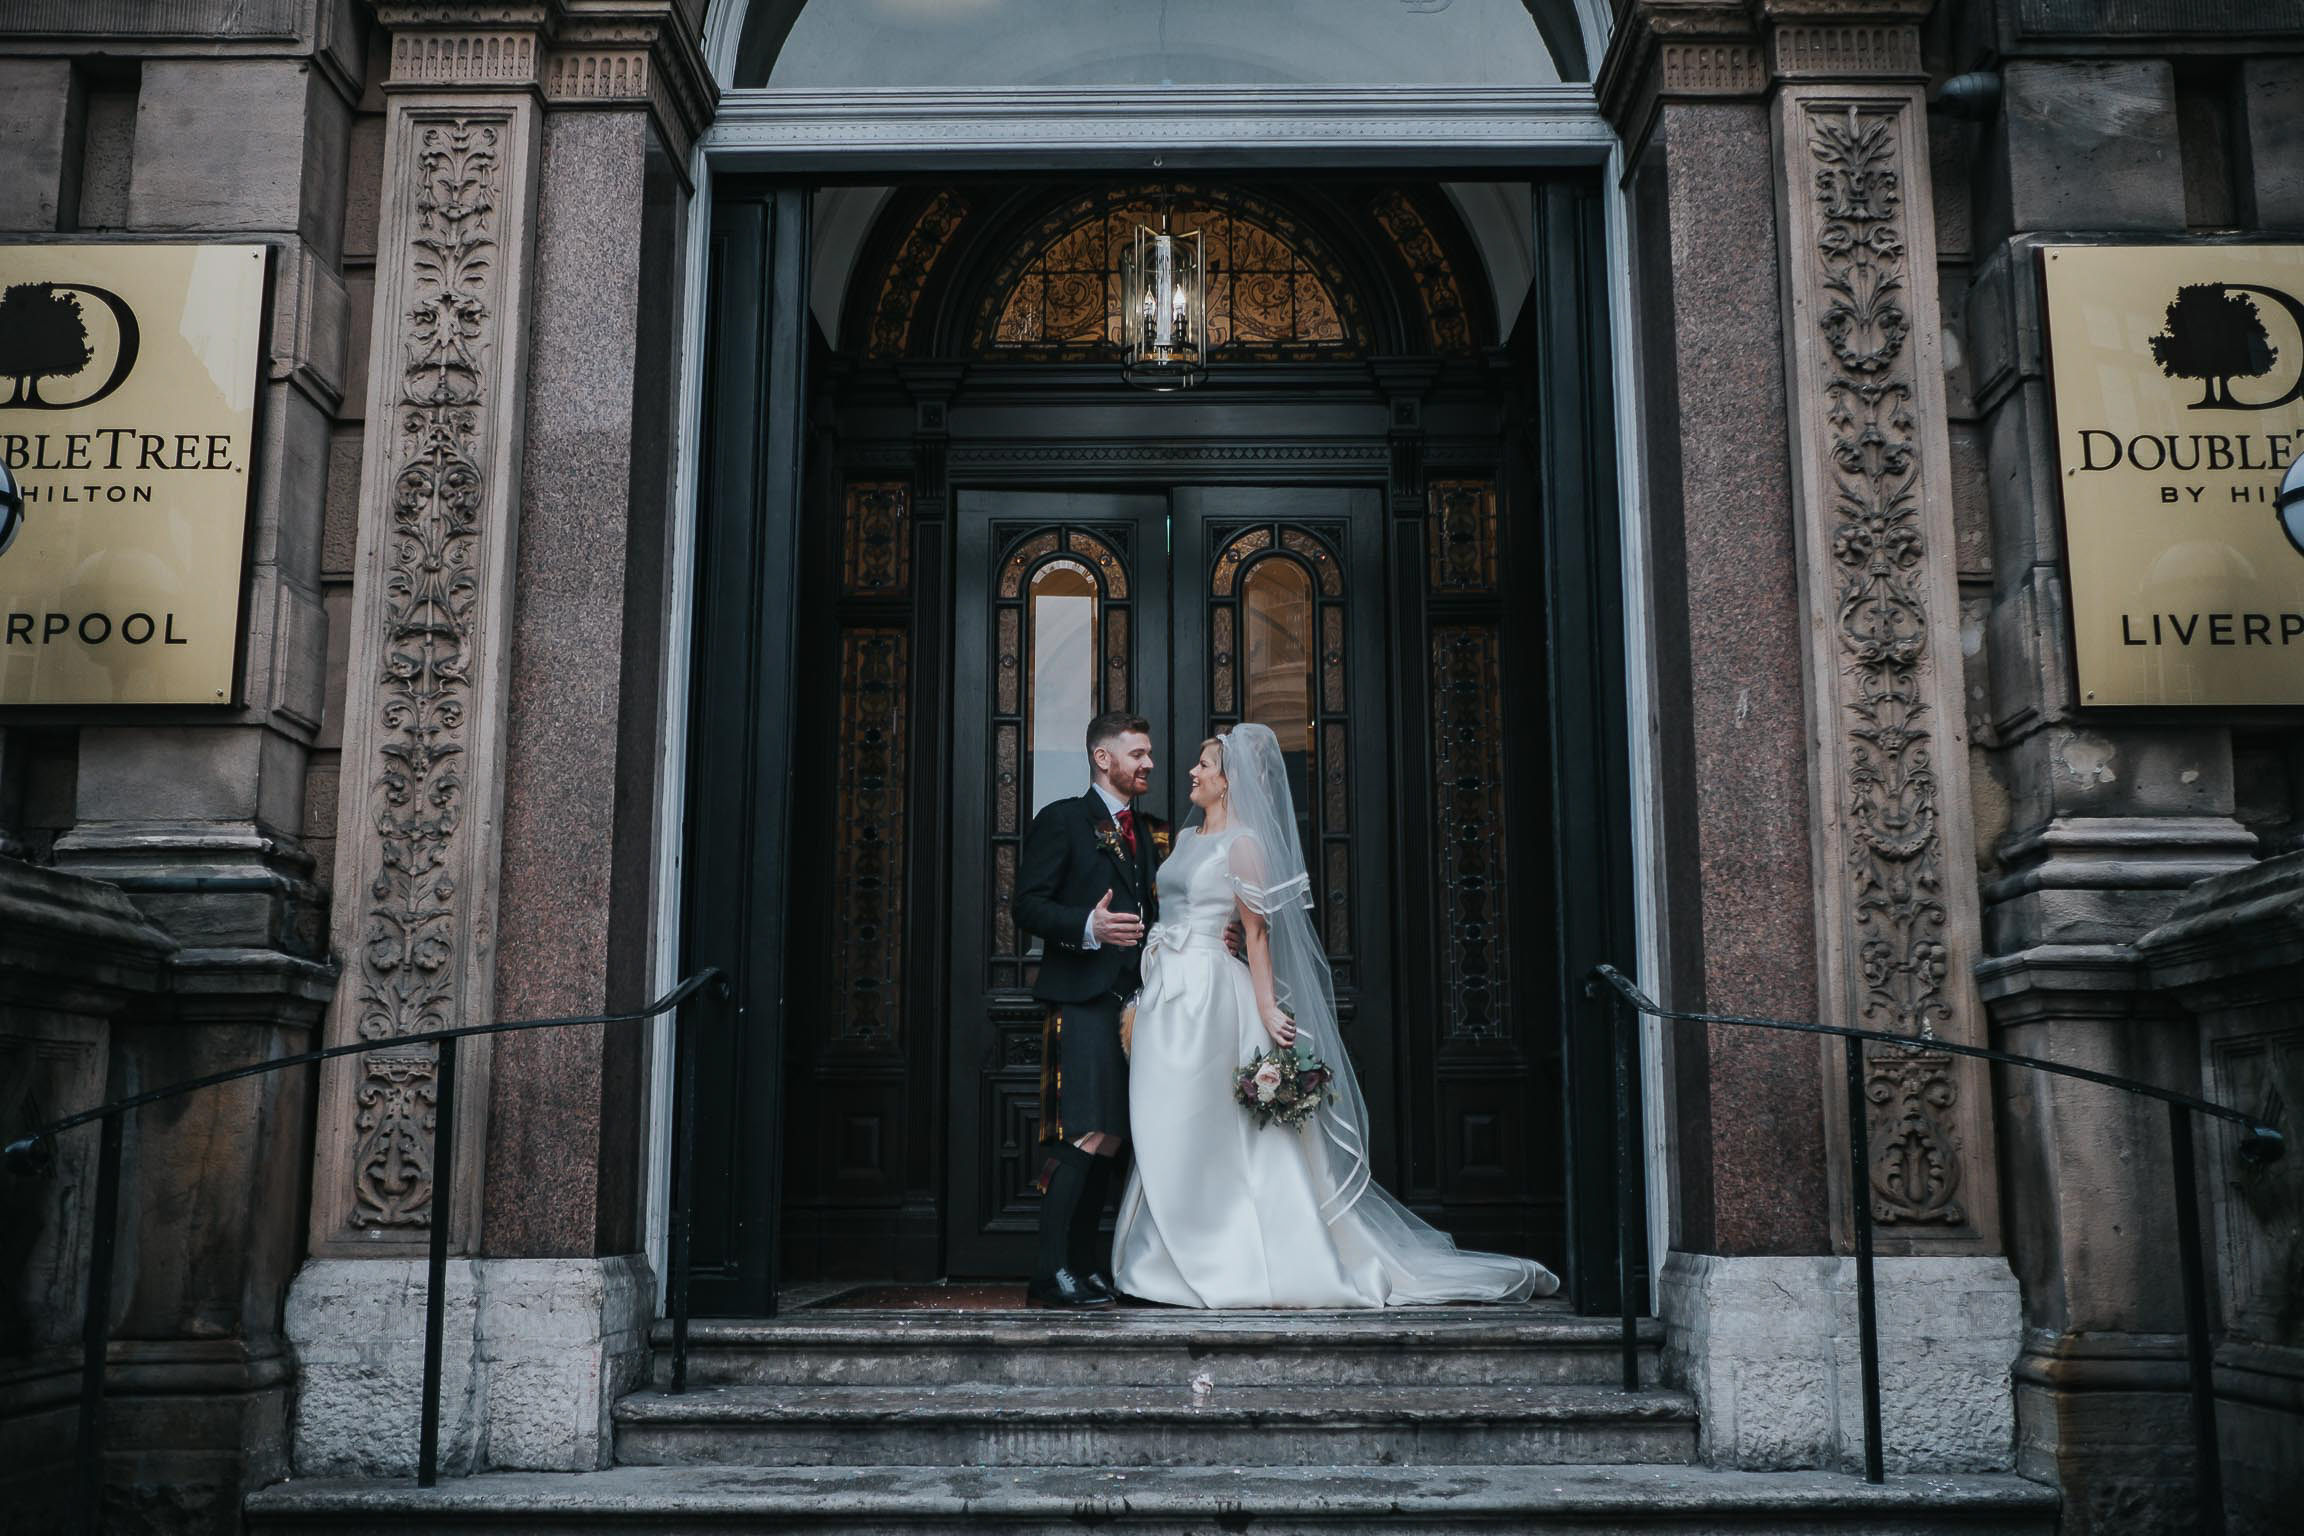 bride and groom on the steps at the front of the double tree by Hilton in Liverpool